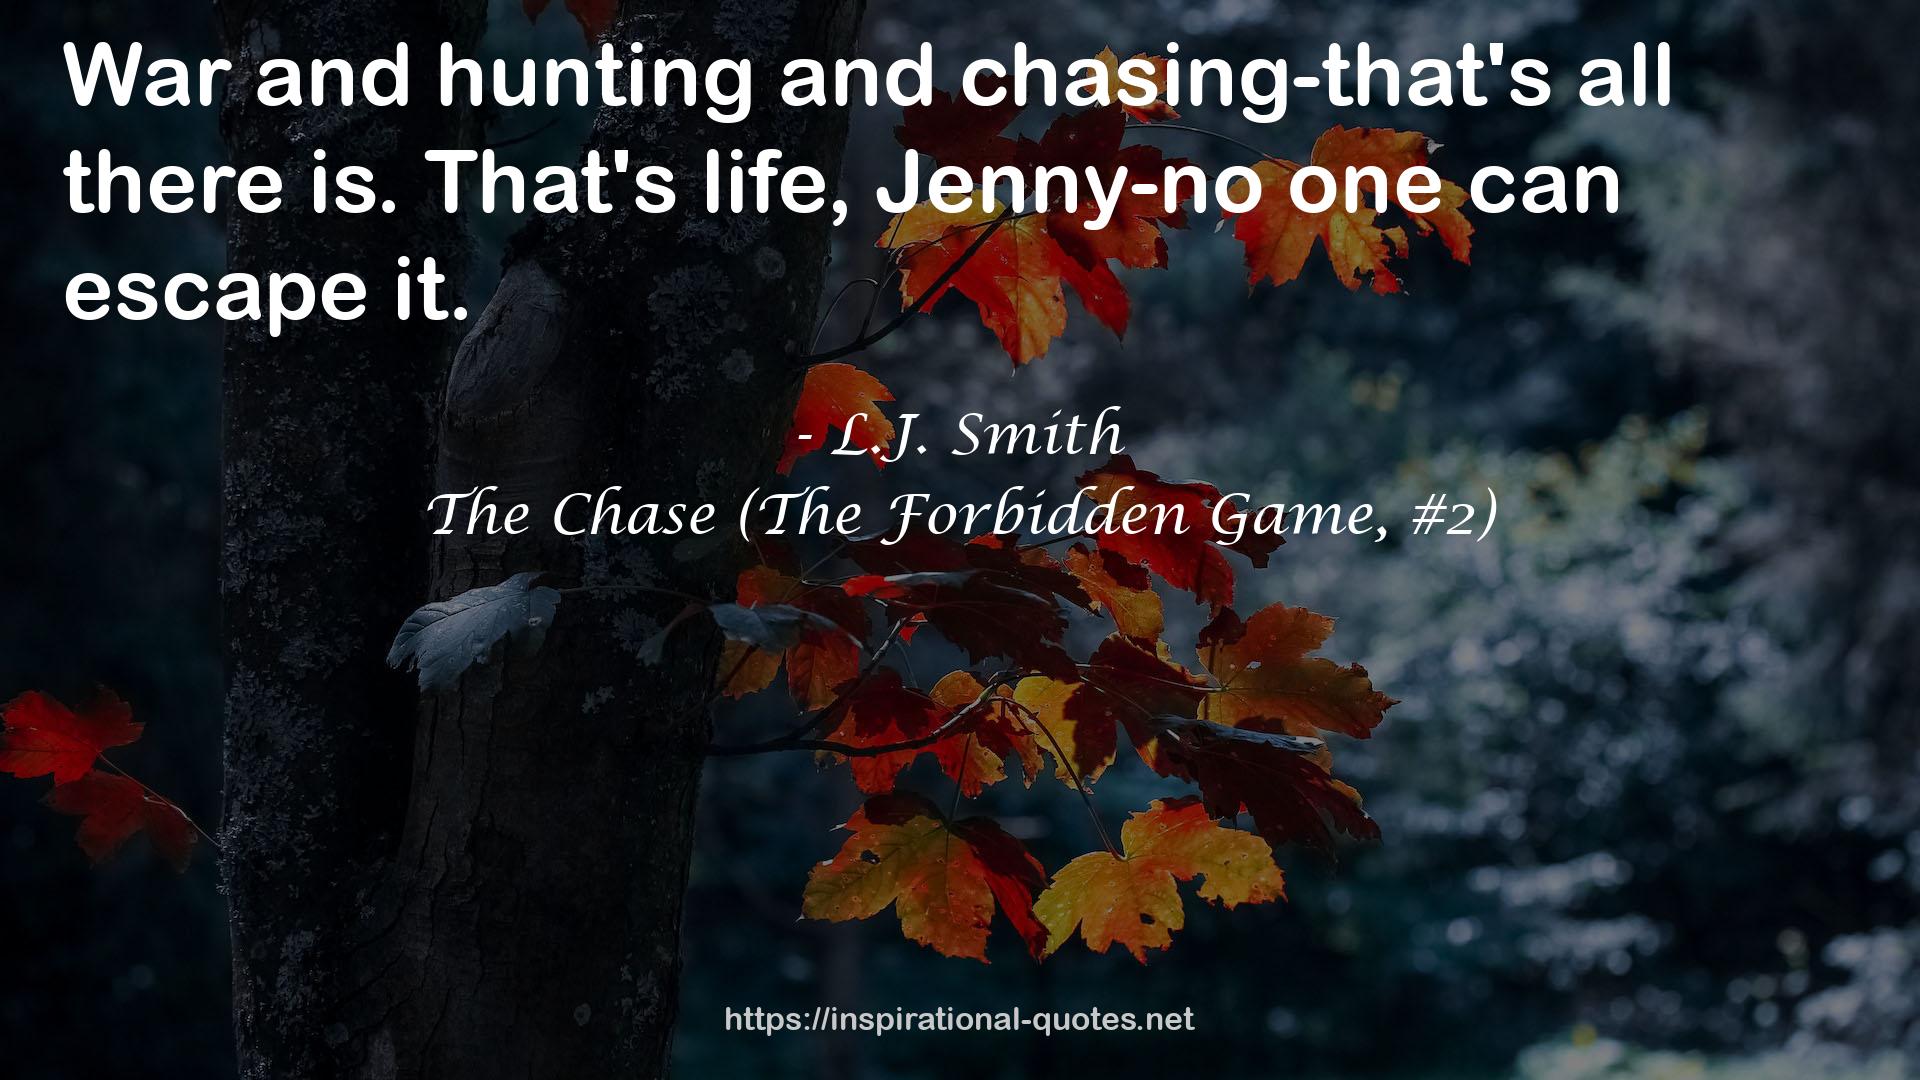 The Chase (The Forbidden Game, #2) QUOTES